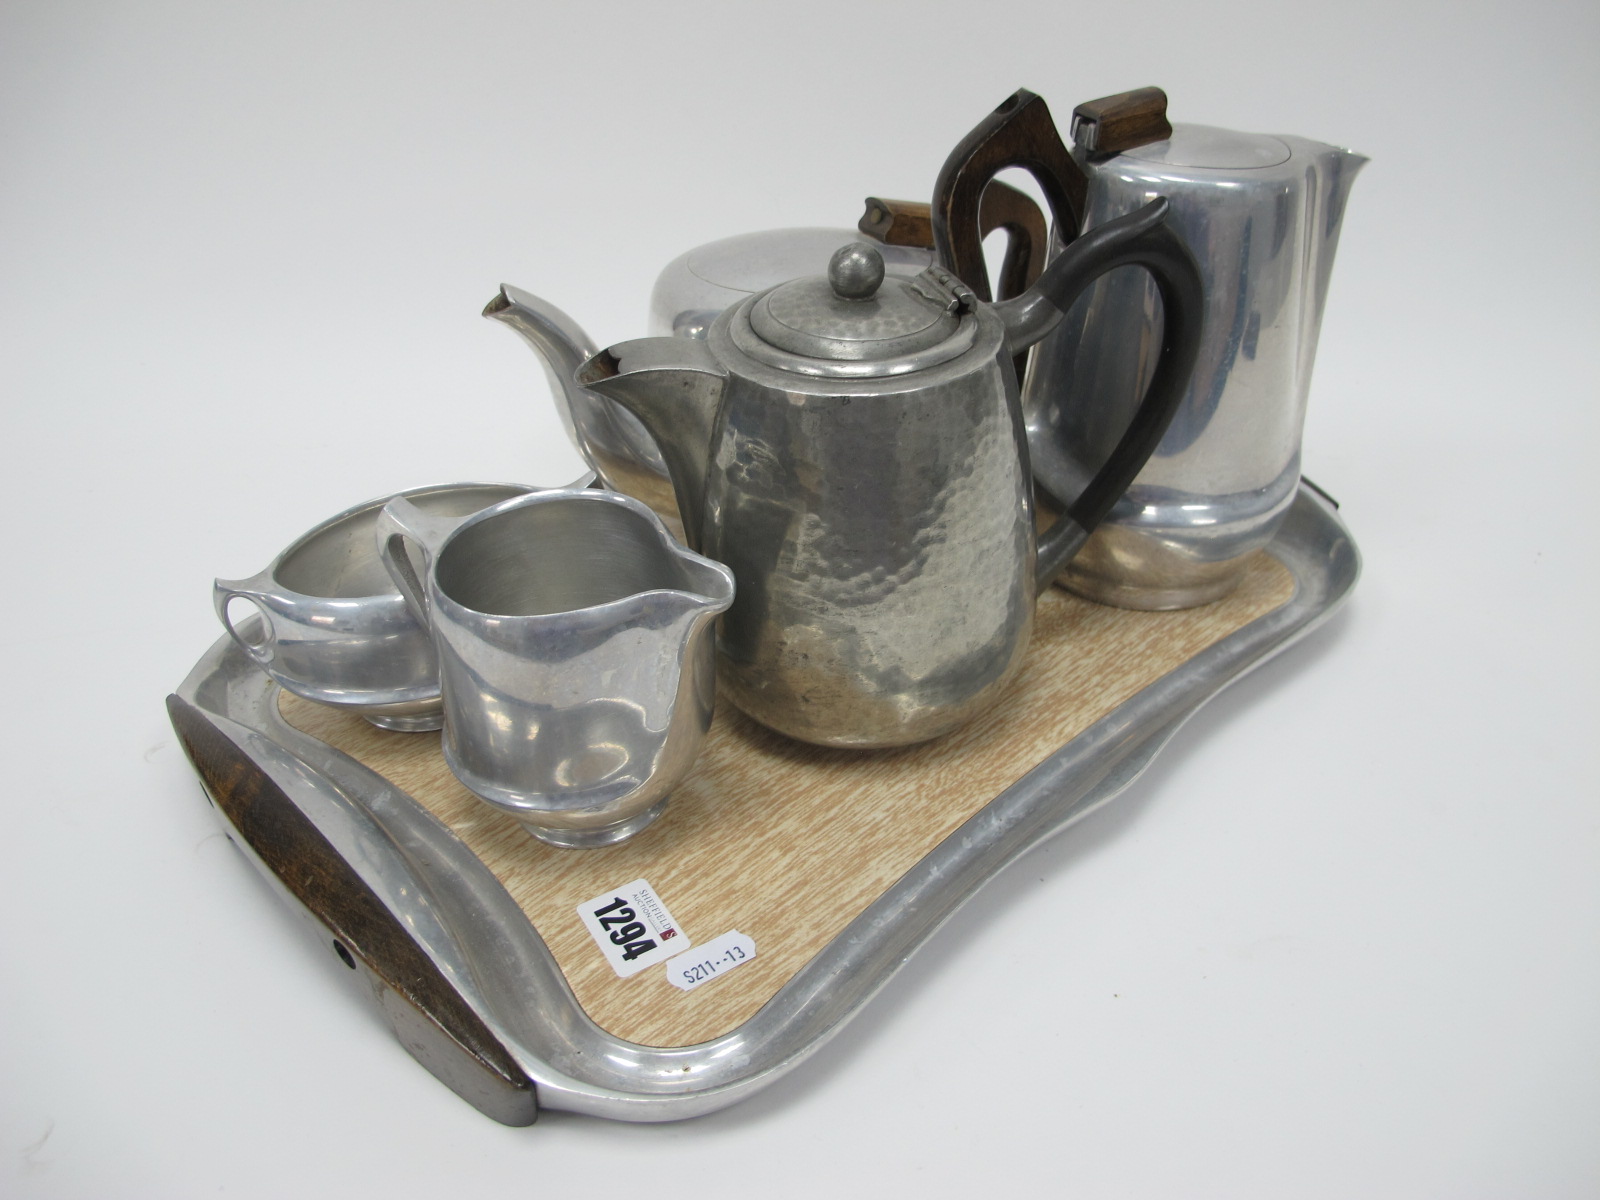 A Picquot Ware Tea Service, pewter jug including tray.